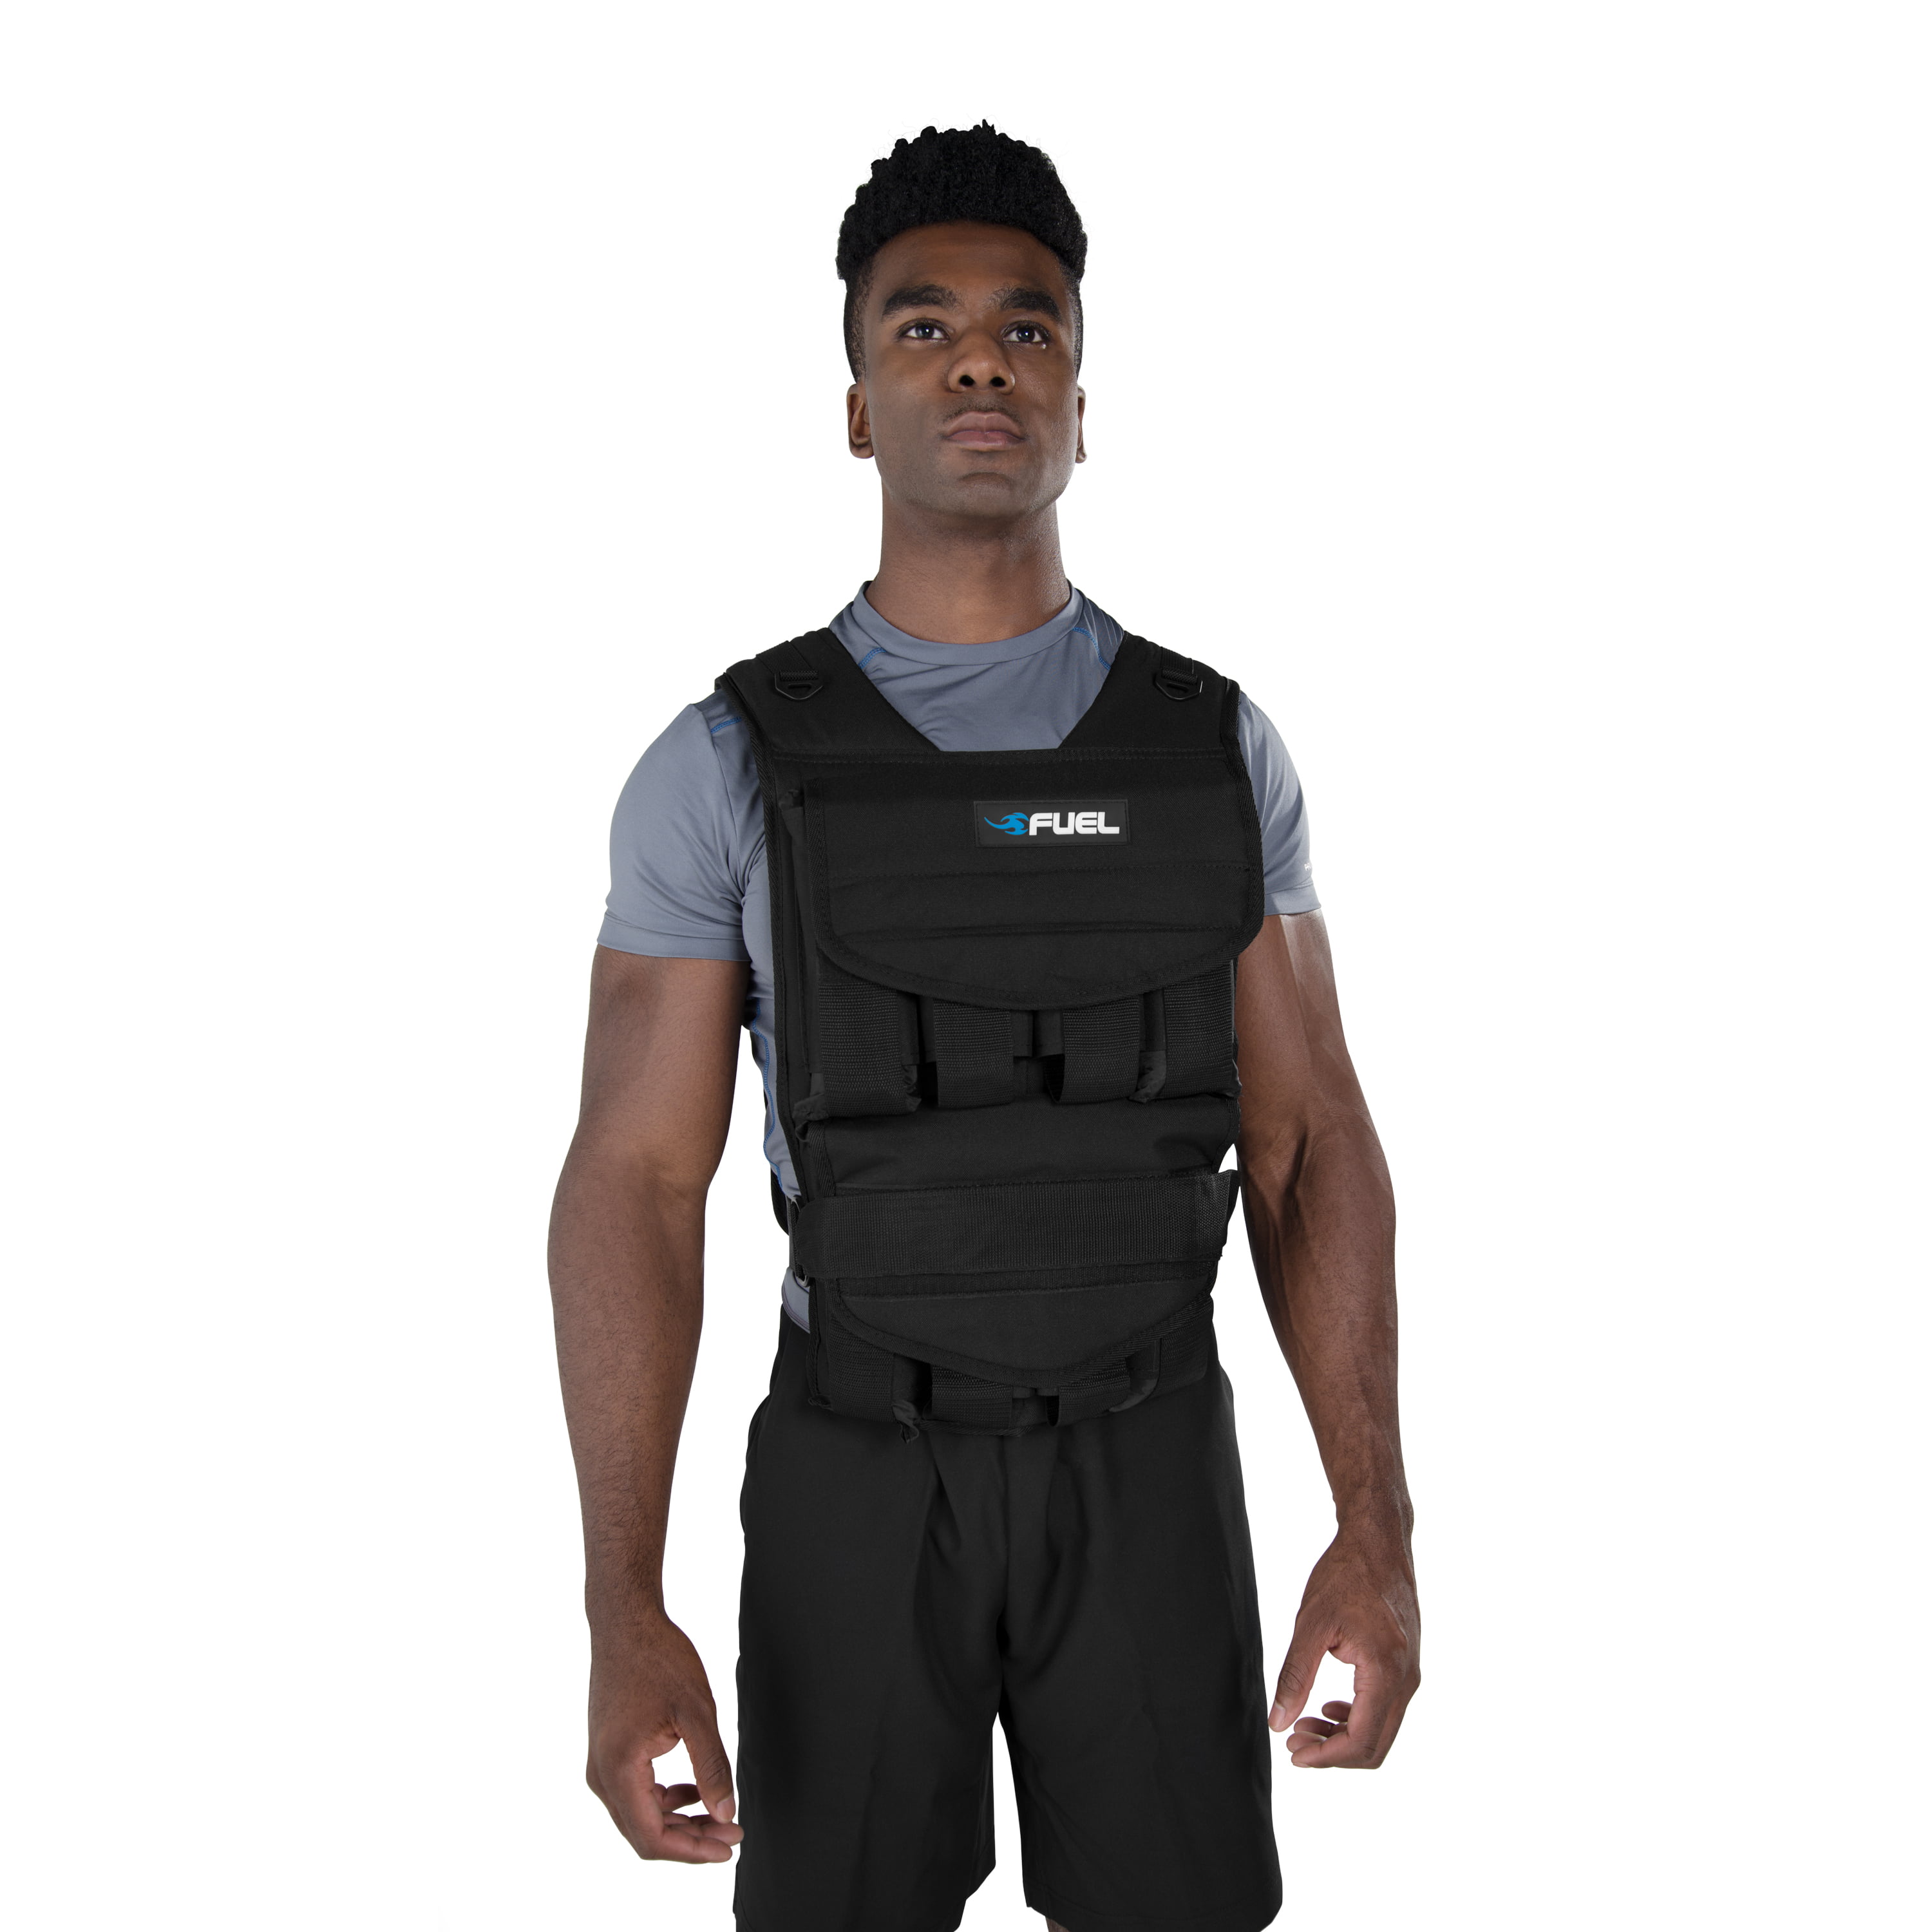 weight included Swift360 40lbs BLACK Weighted vest no shoulder pad 